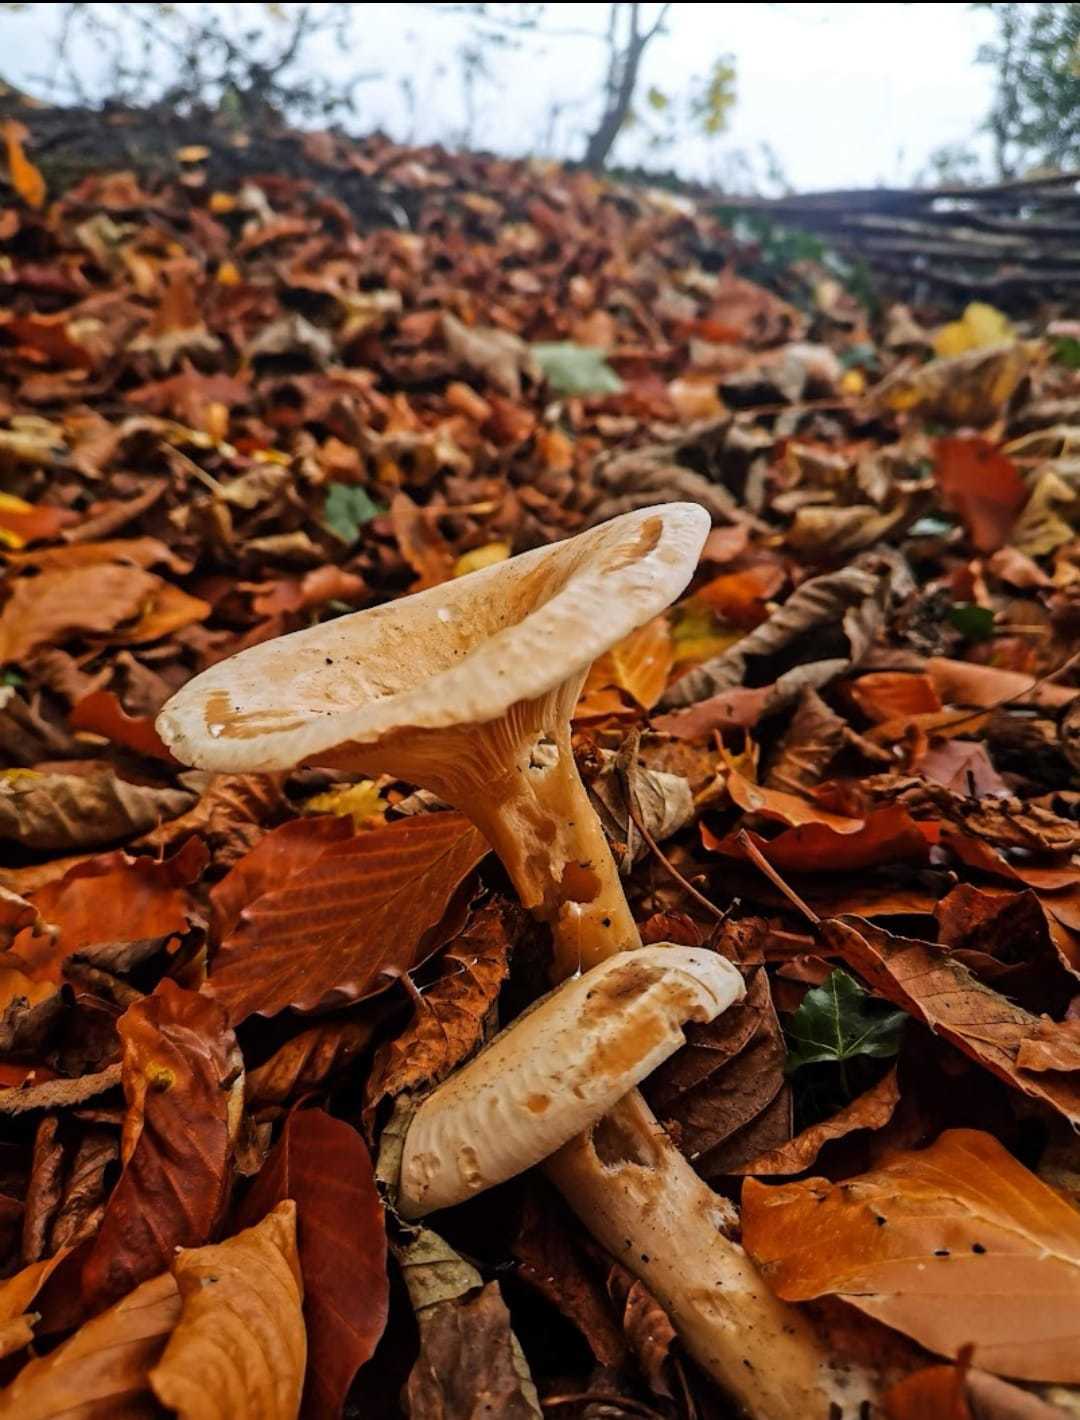 Mushrooms at Marbury Country Park by Ann Marie Taylor